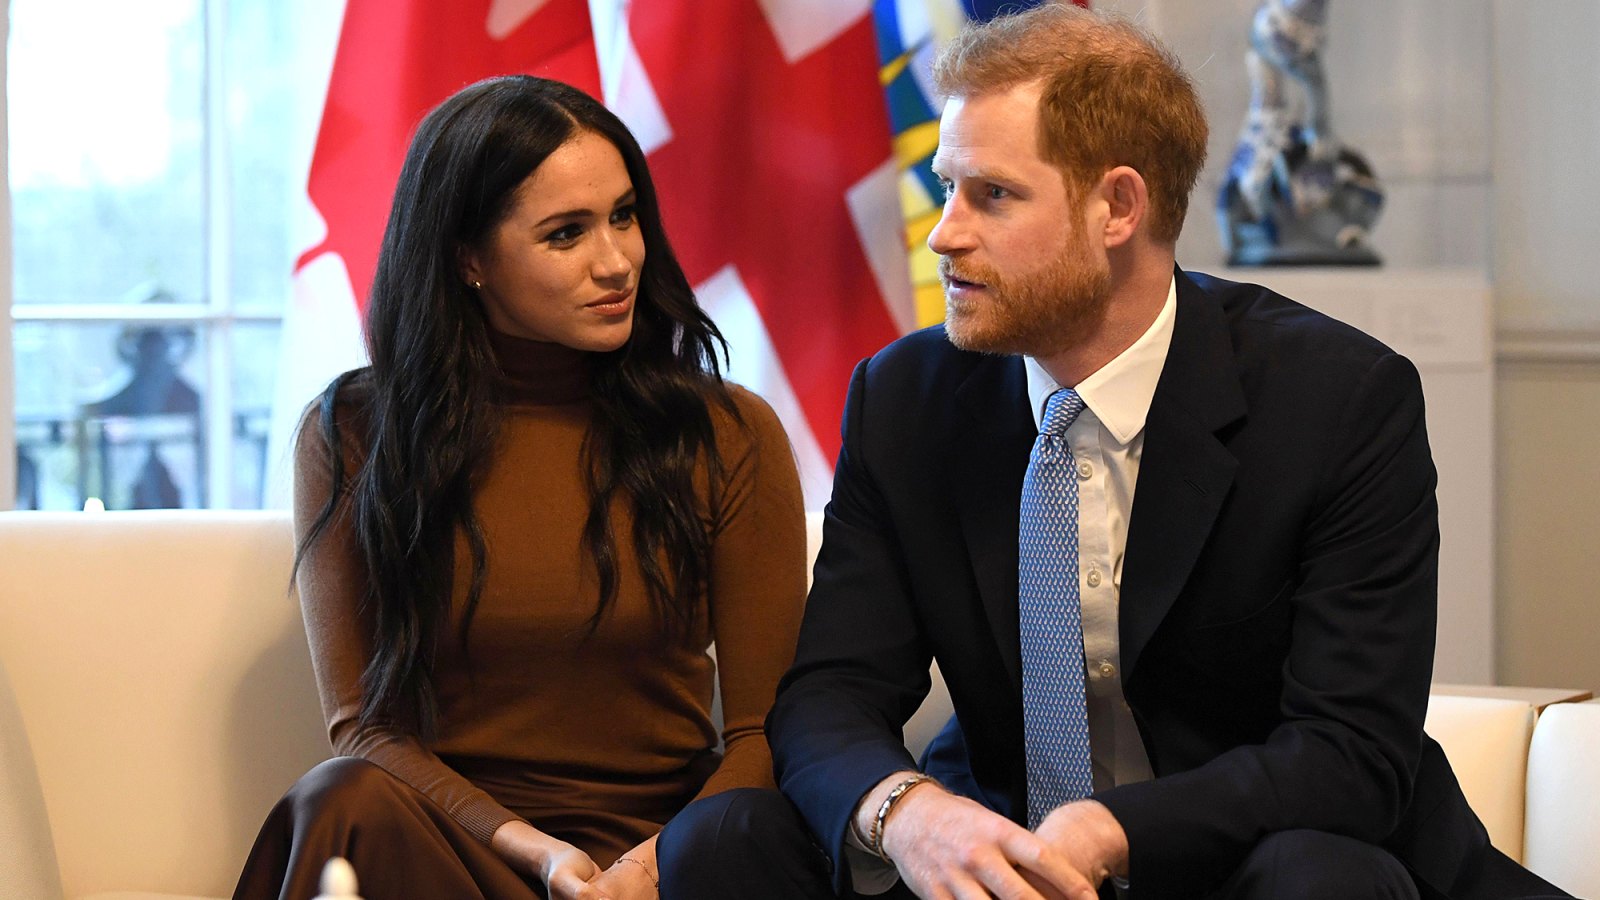 Prince Harry Says He Was 'Probably Bigoted' Before Falling in Love With Wife Meghan Markle: 'Incredibly Naive'